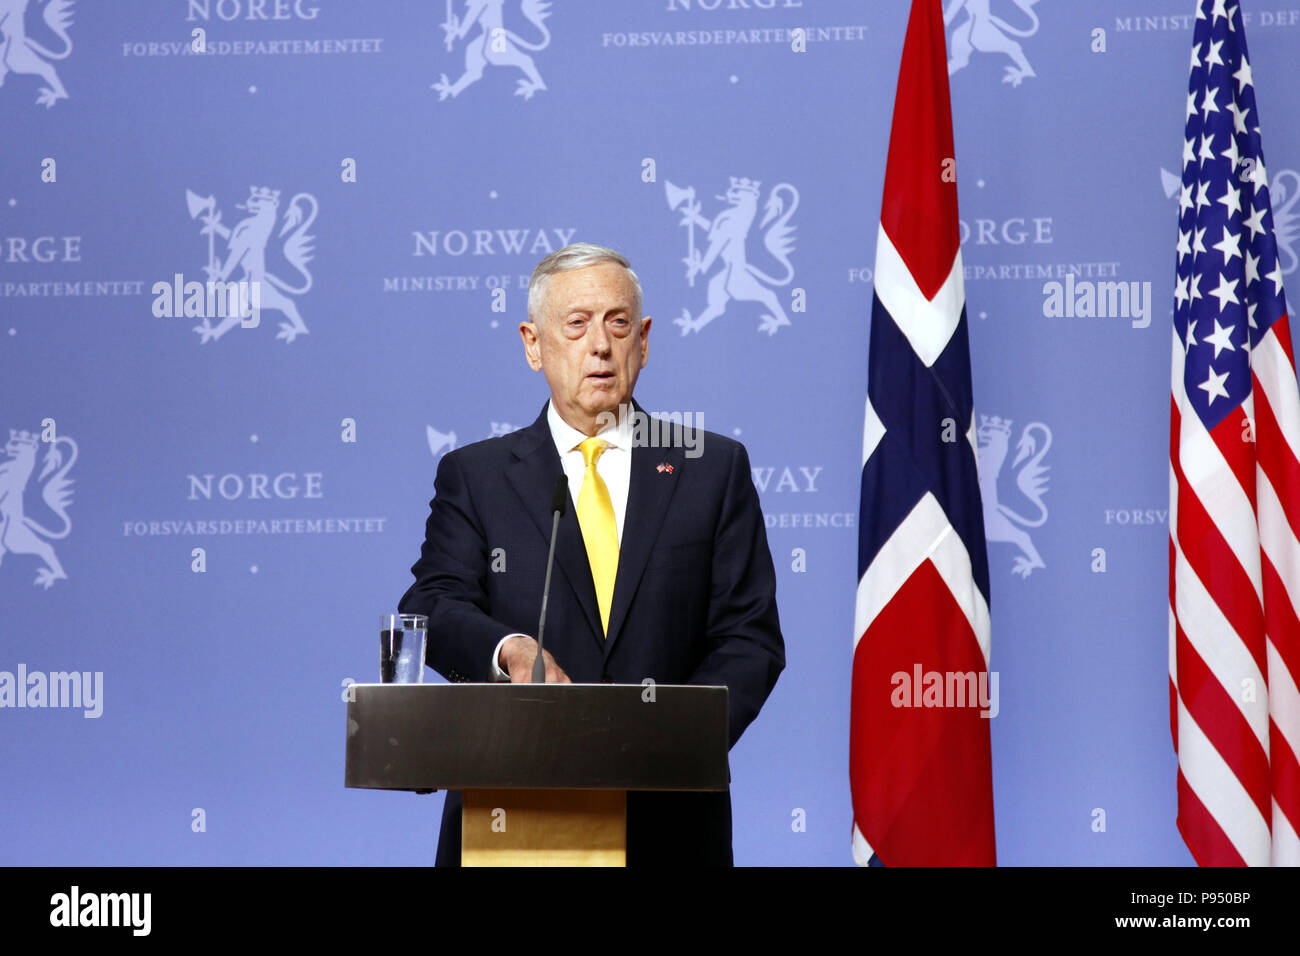 Oslo, Norway. 14th July, 2018. U.S. Secretary of Defense James Mattis attends a joint press conference with Norwegian Minister of Defence Frank Bakke-Jensen (not seen in picture) in Oslo, Norway, July 14, 2018. Norway on Saturday reconfirmed its commitment to gradually increase defense spending to two percent of GDP in the North Atlantic Treaty Organization (NATO) during a visit by U.S. Secretary of Defense James Mattis to the Nordic country. Credit: Liang Youchang/Xinhua/Alamy Live News Stock Photo